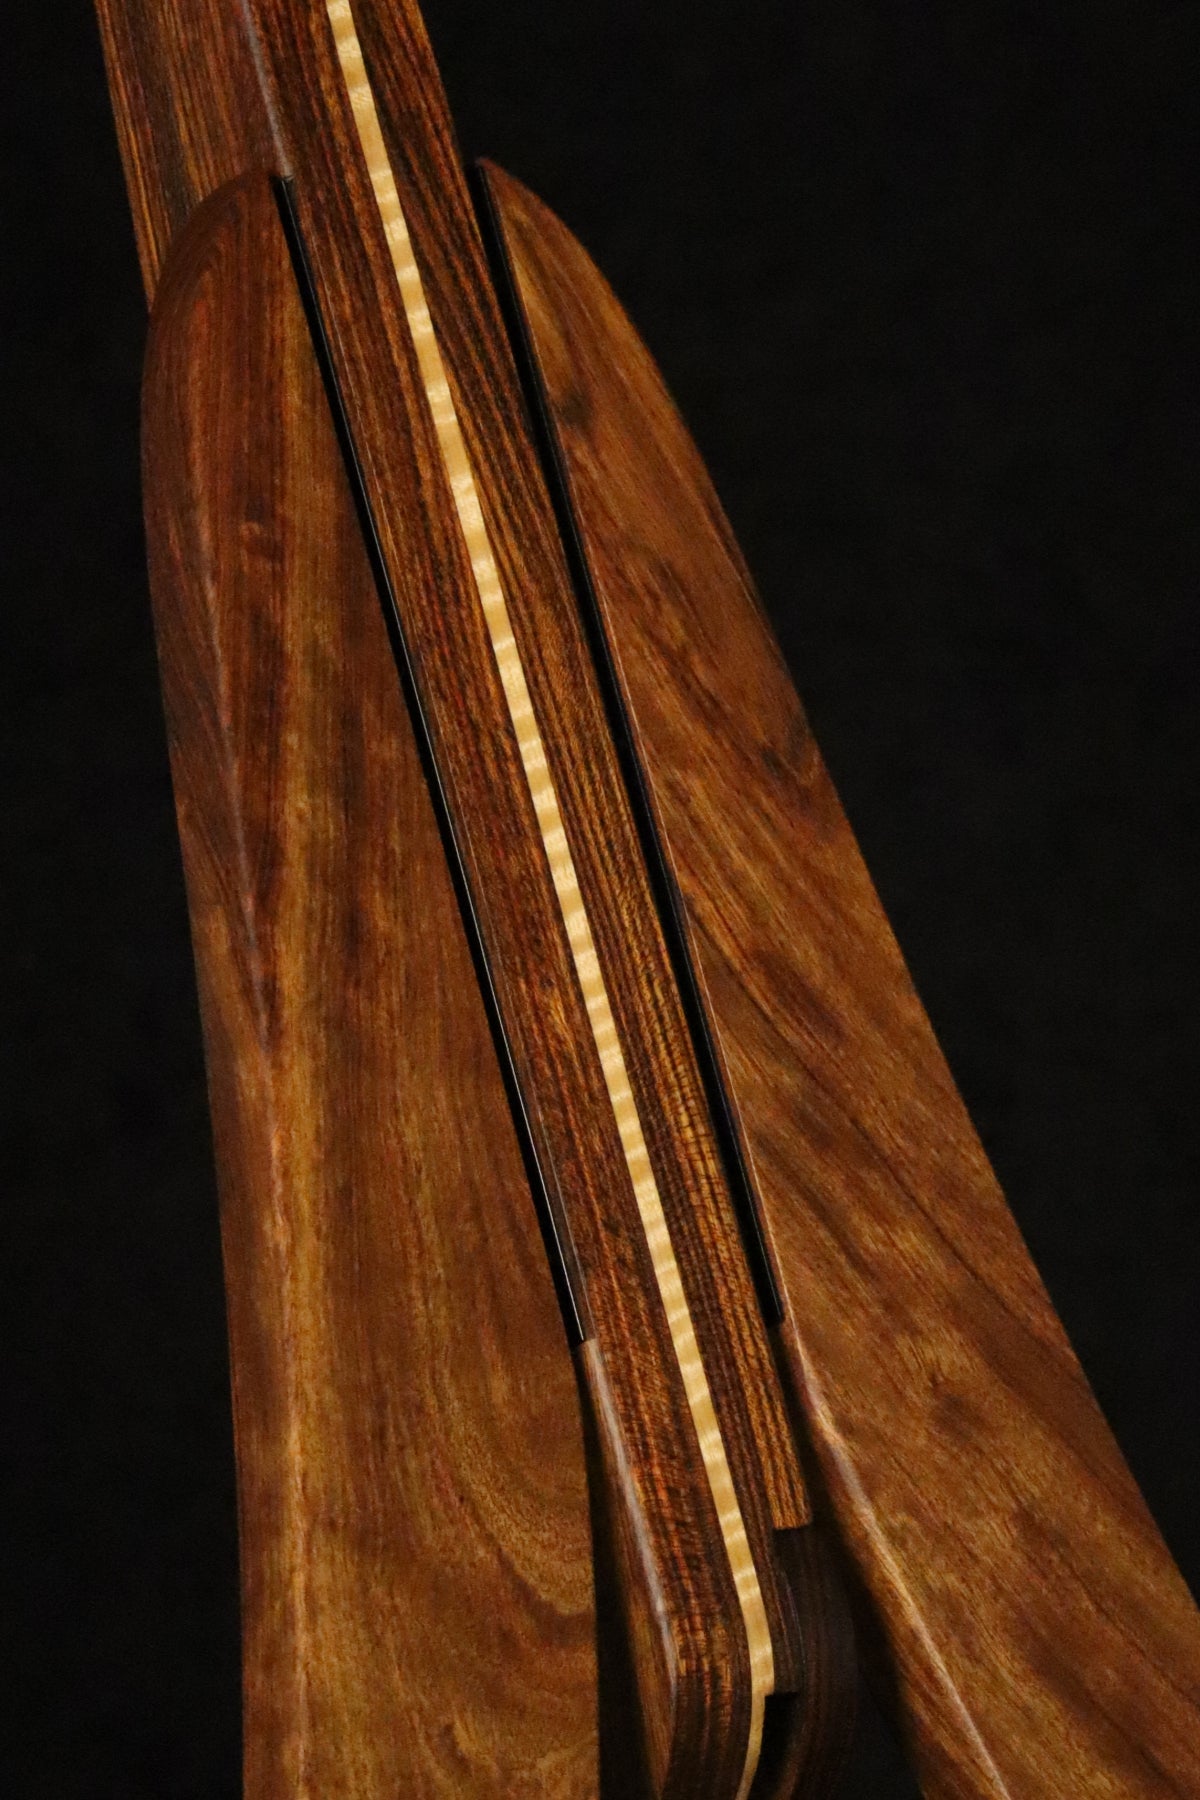 Folding chechen Caribbean rosewood and curly maple wood banjo floor stand closeup front image